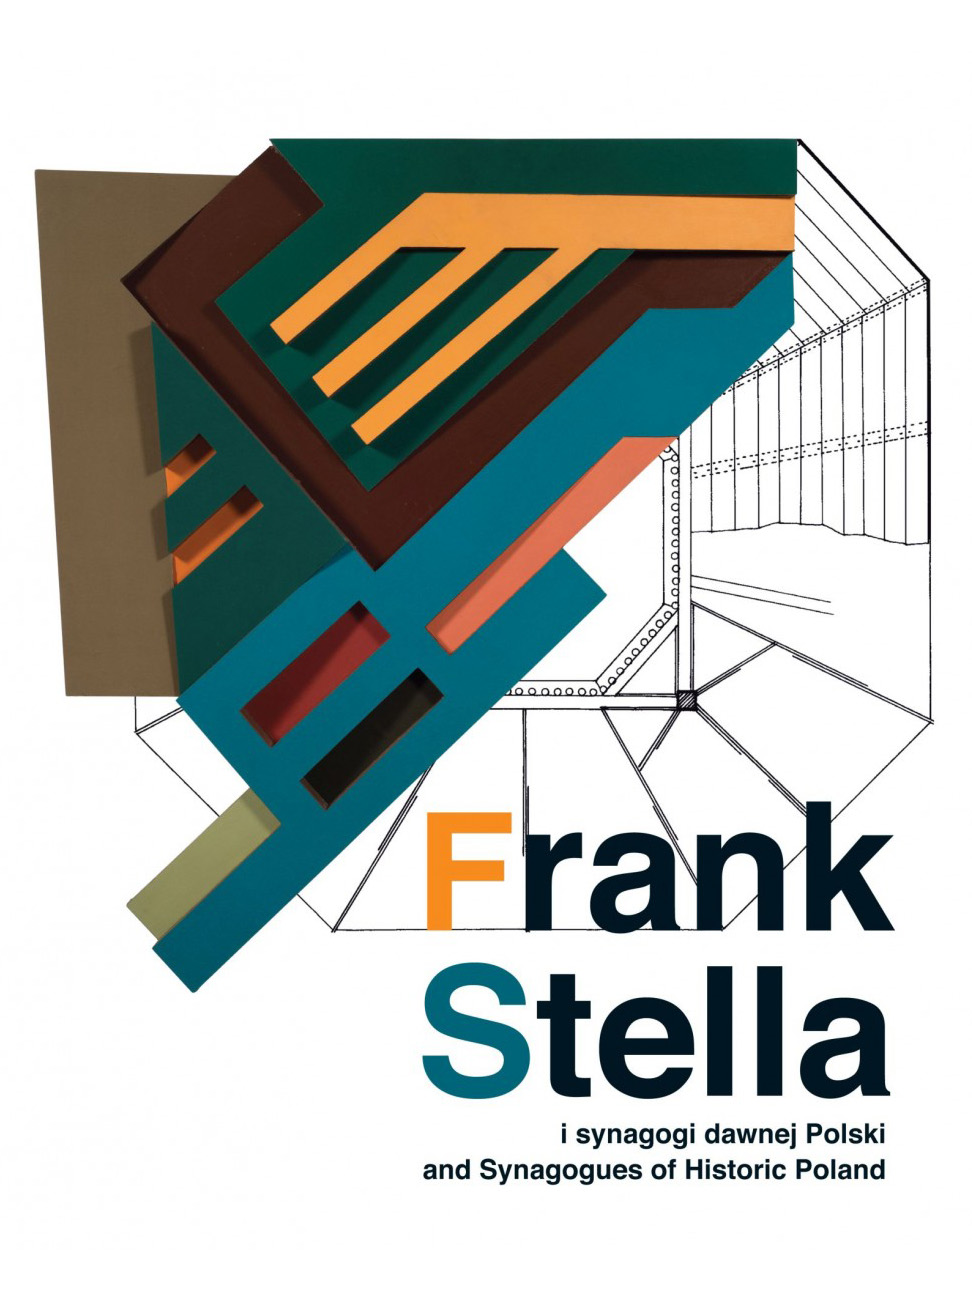 Frank Stella and Synagogues of Historic Poland